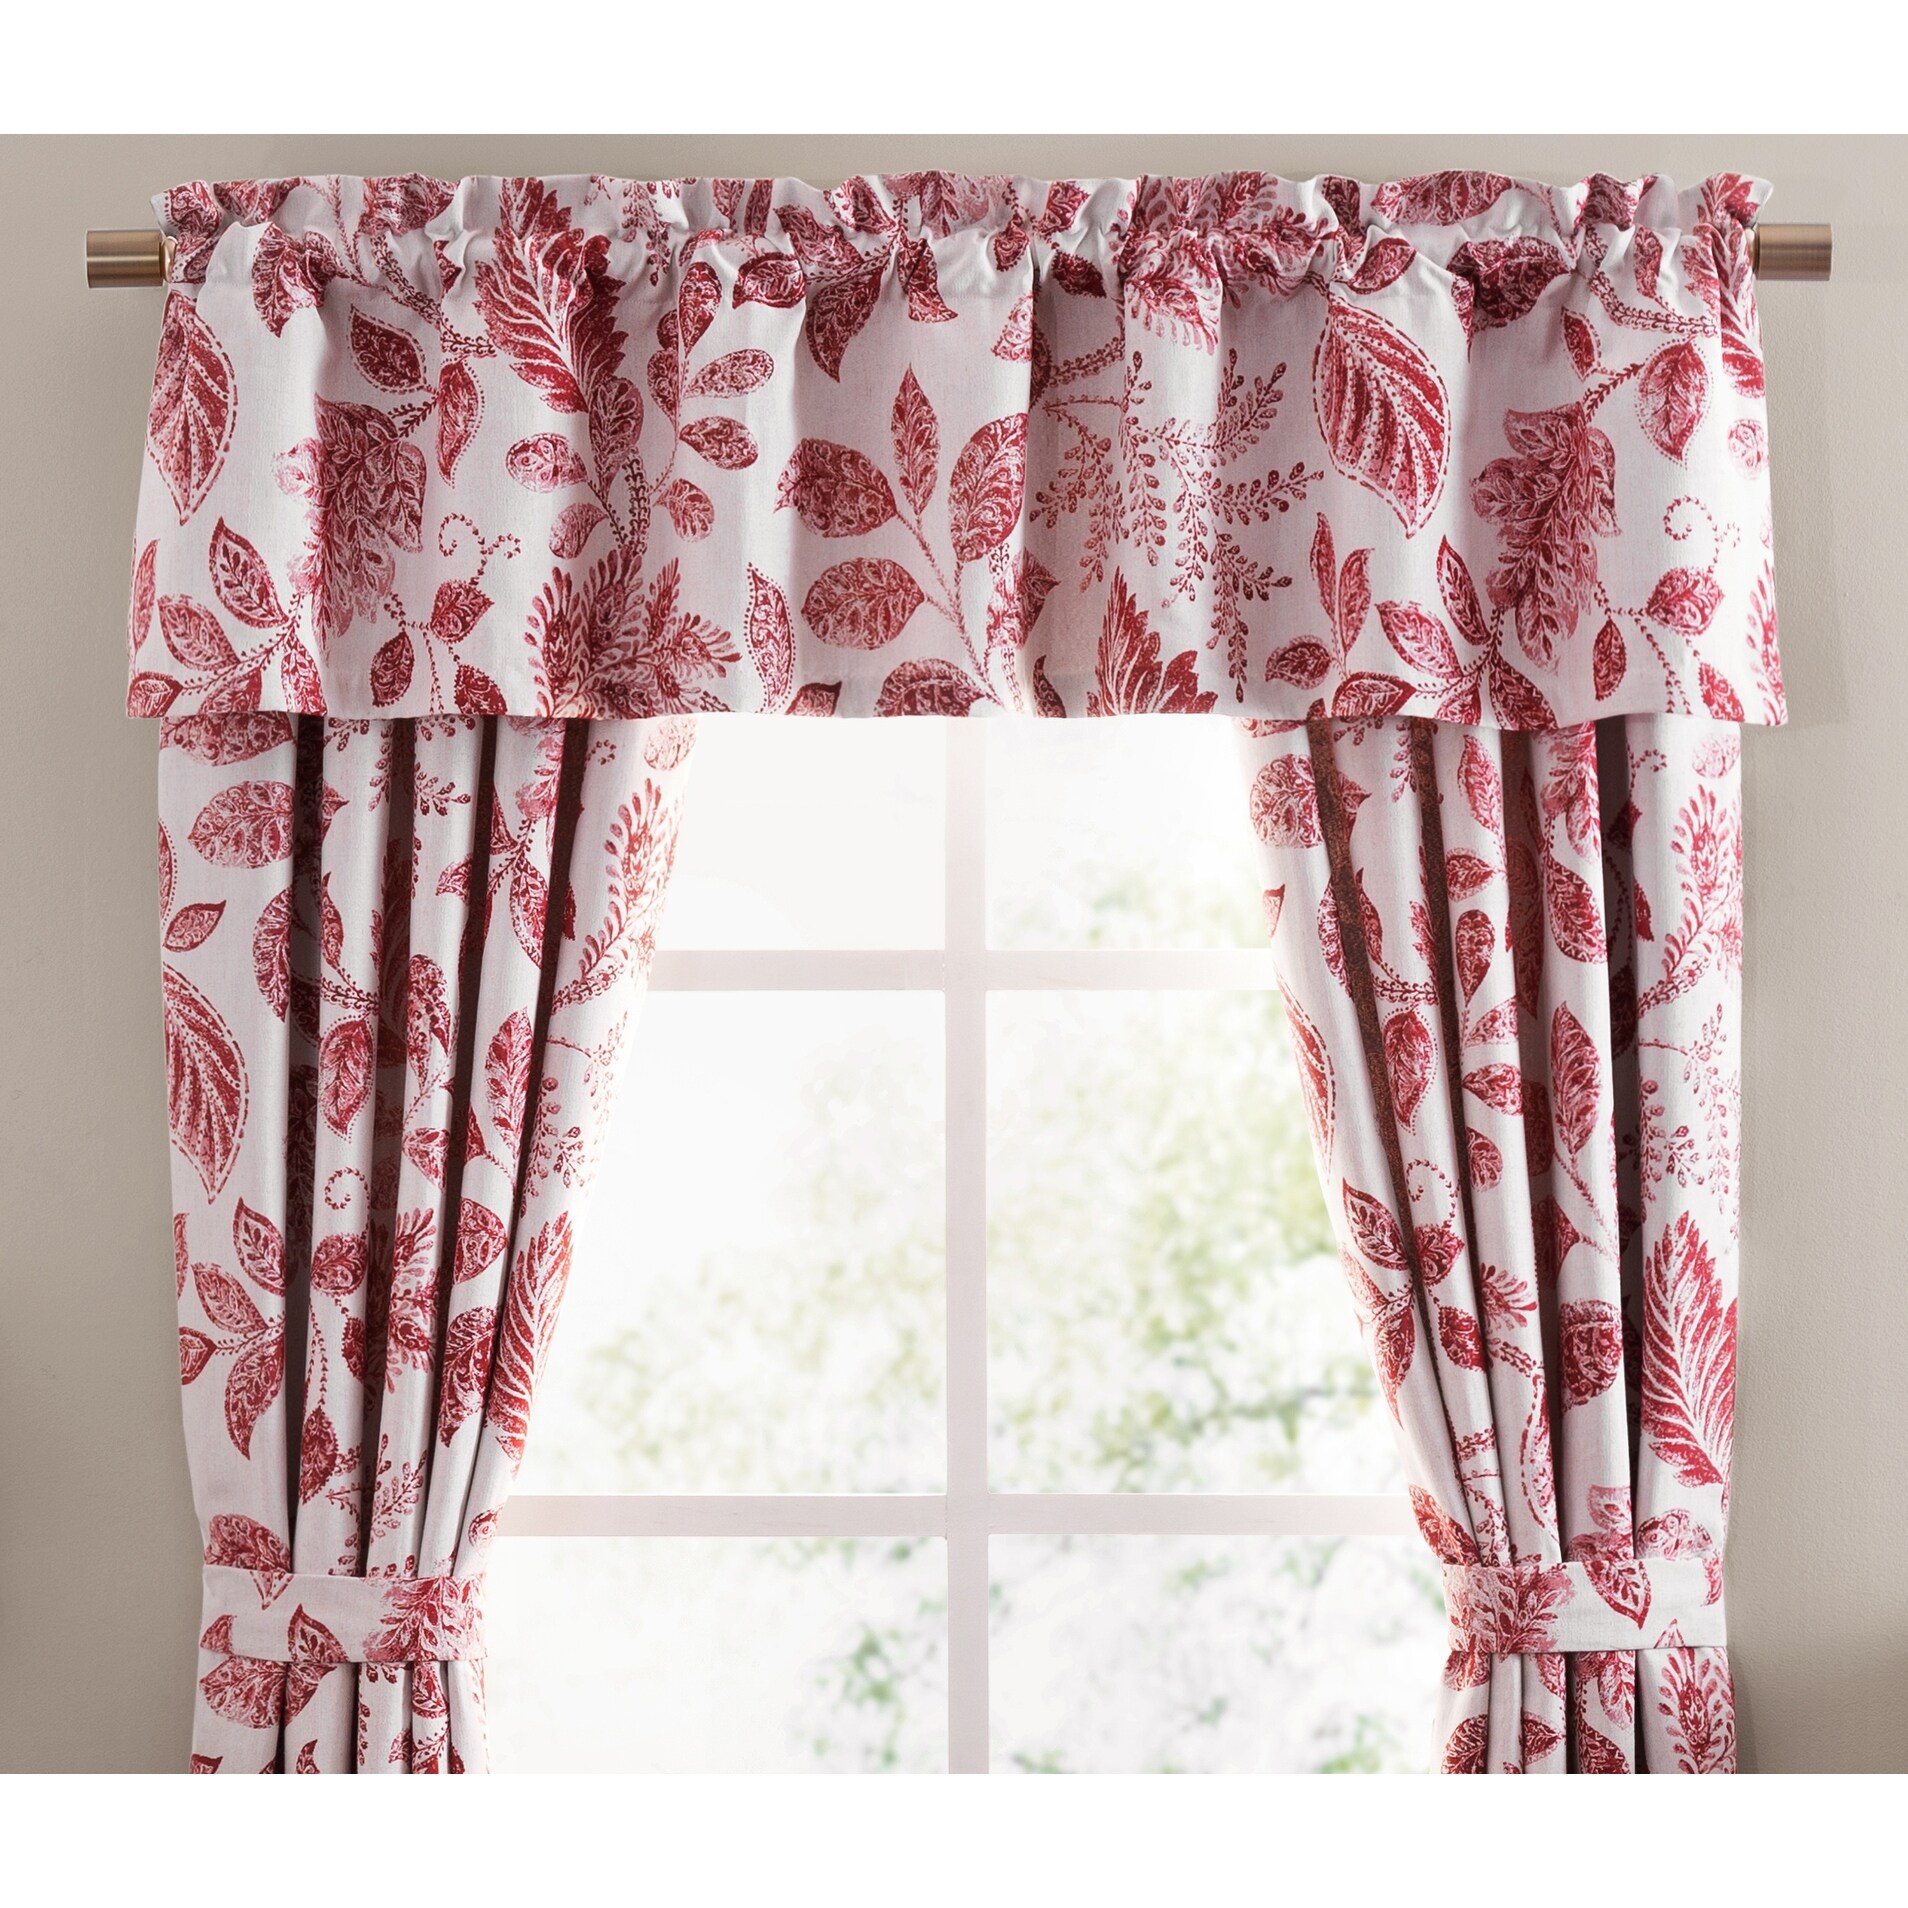 NEW Leaf Vines 3 Piece Tailored Window Valance/Tier Sets Color Choices Modern 